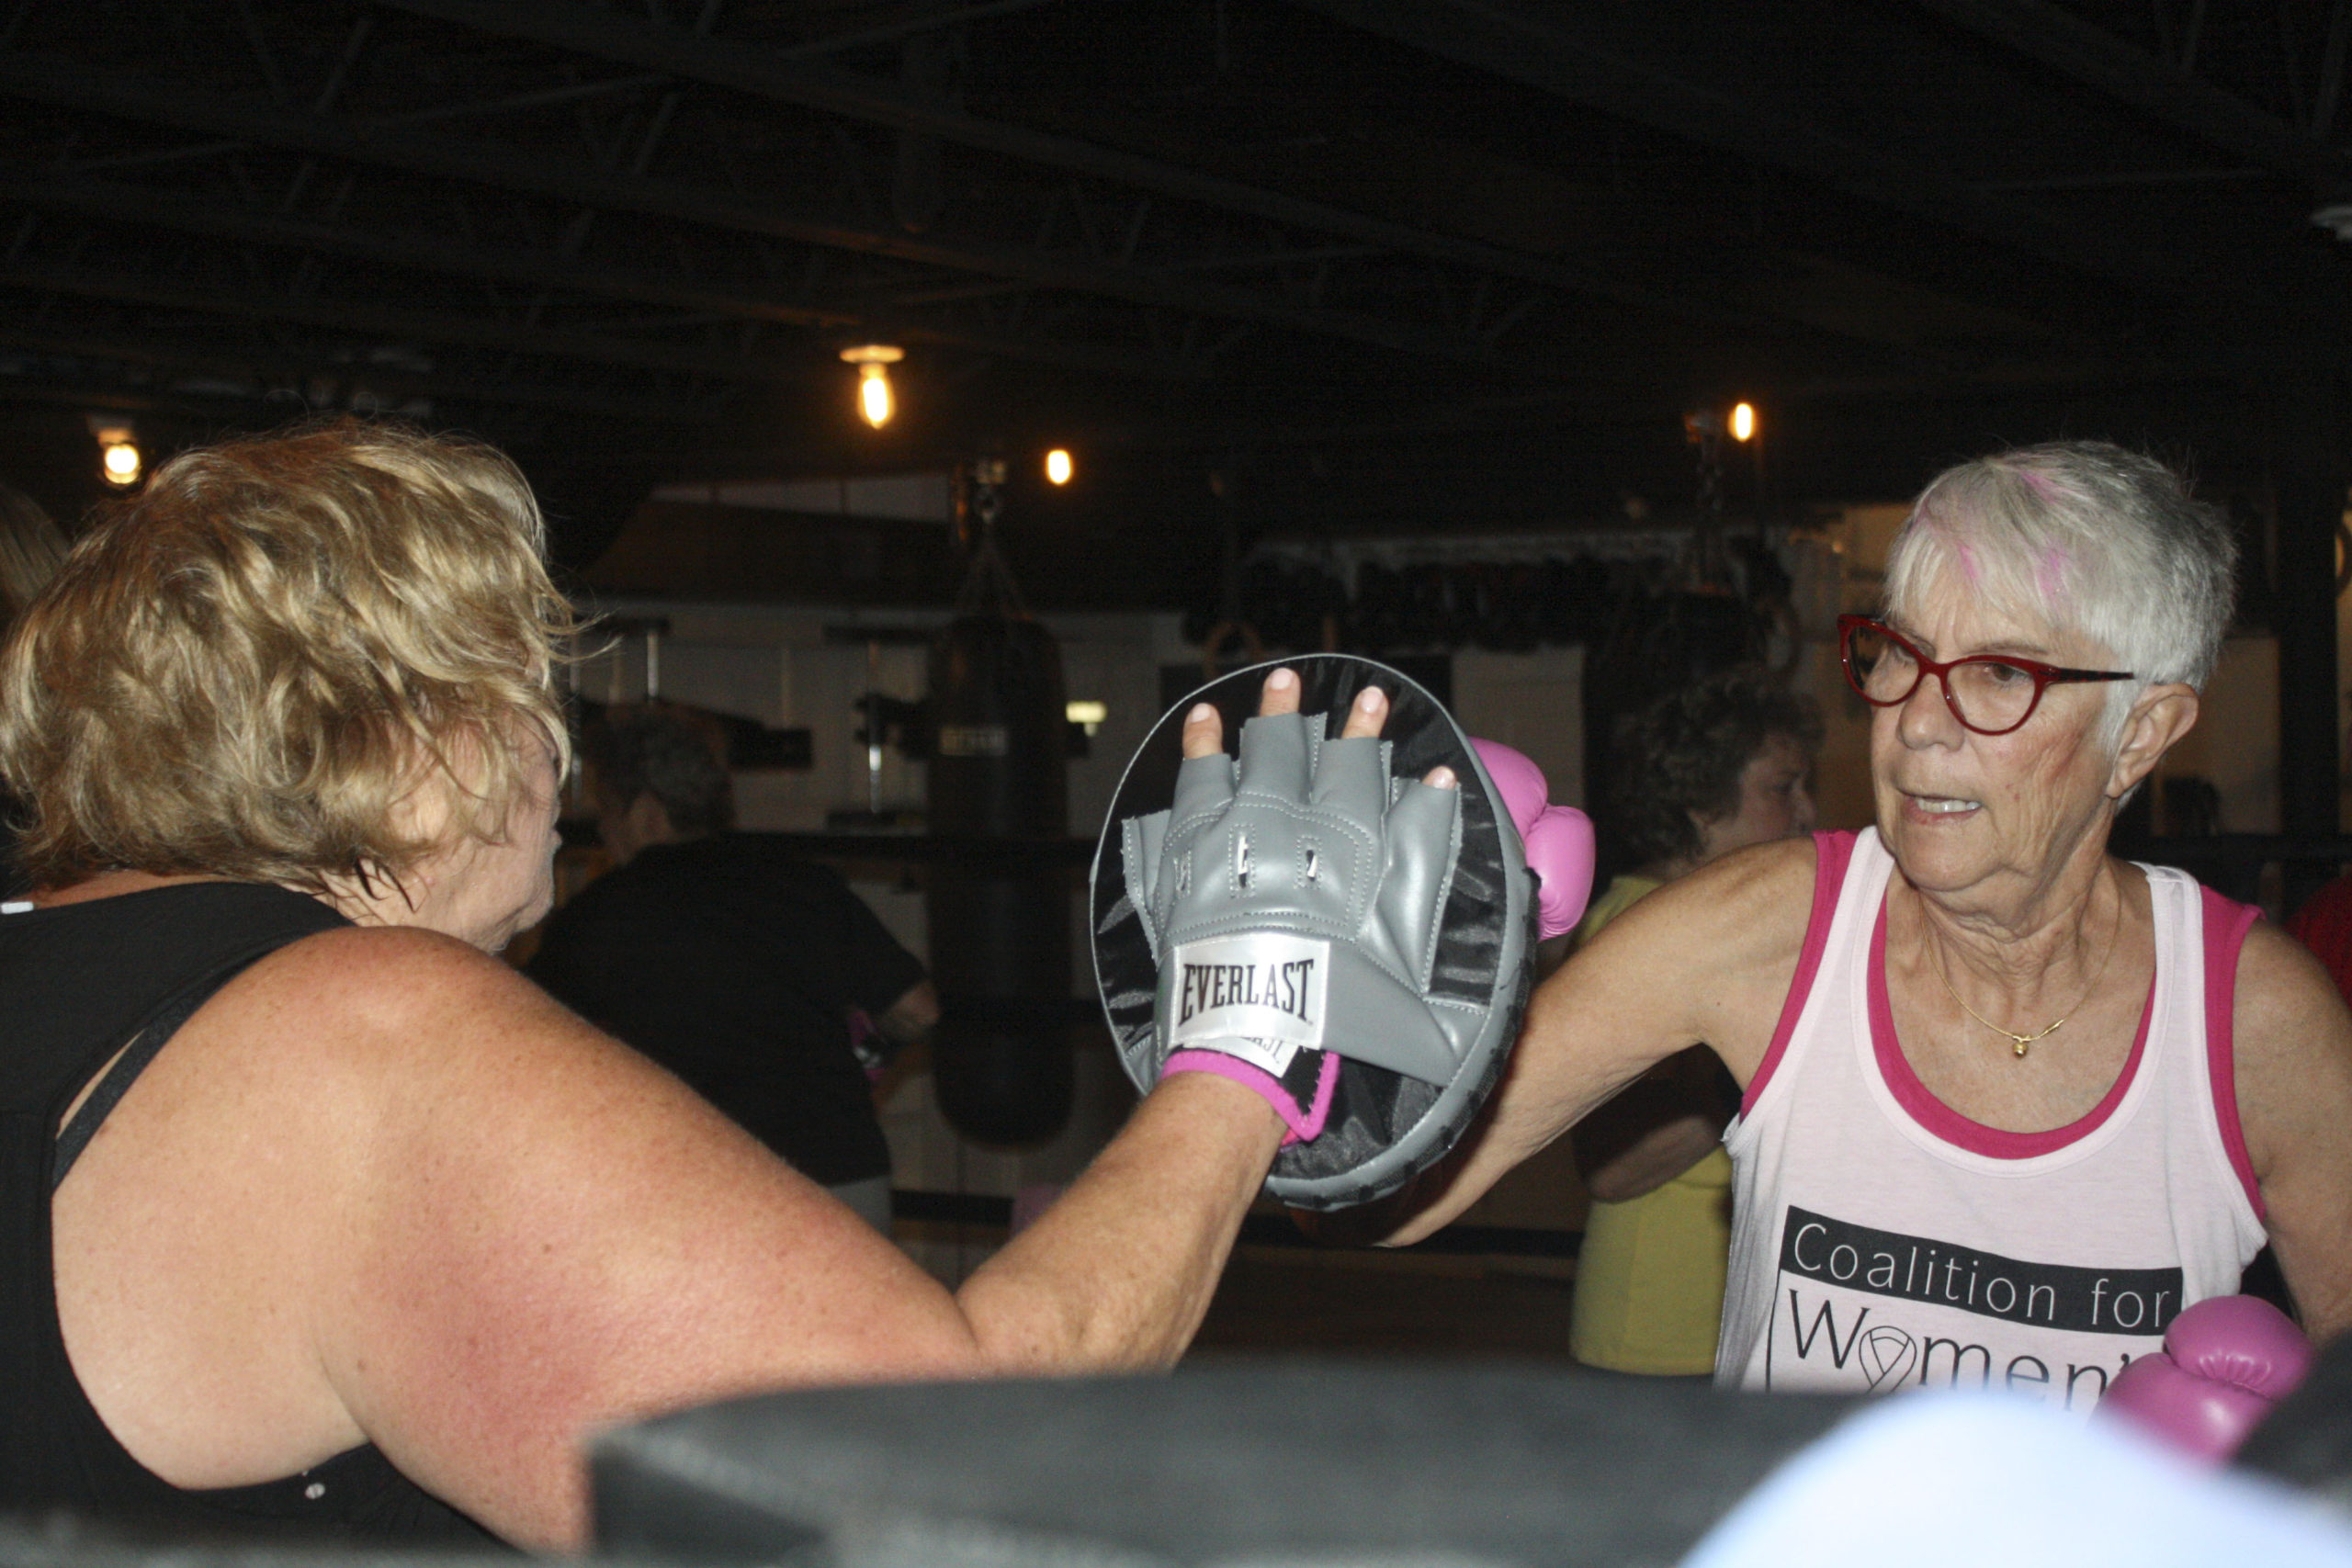 Fight Mode, founder Susie Roden, left, in the ring with Vicki Durand. CALIN RILEY